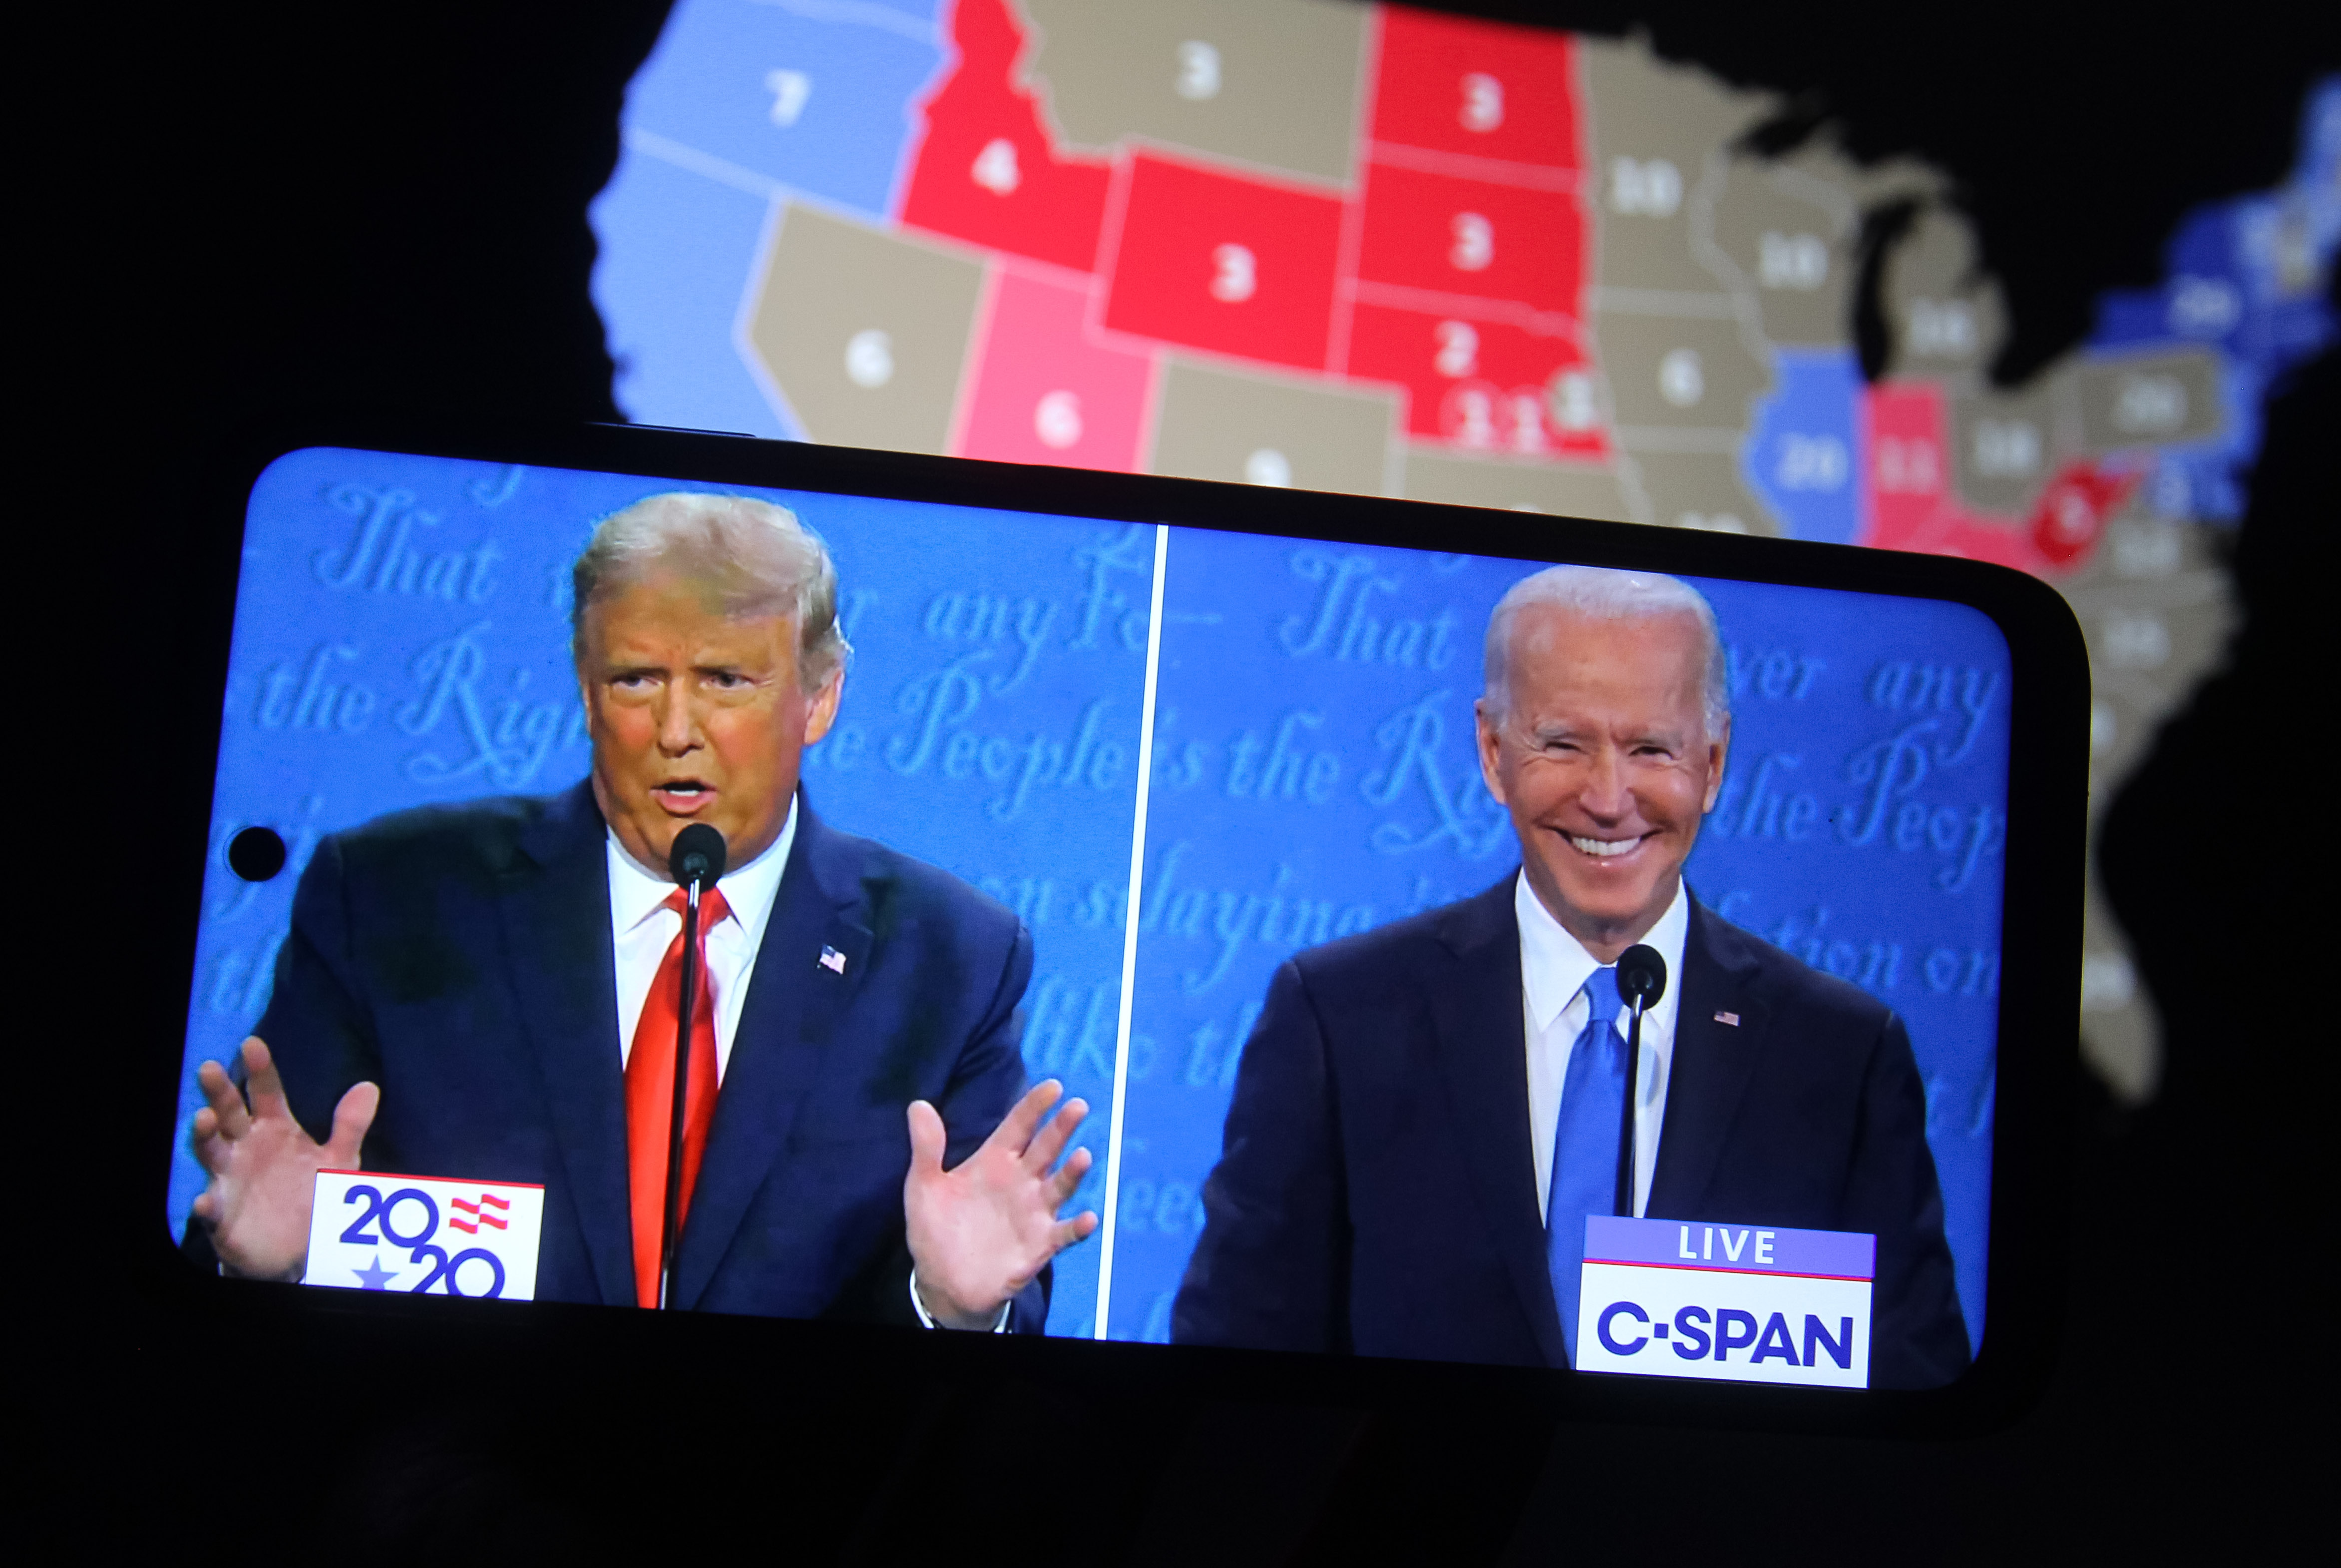 Donald Trump and Biden pictured side-by-side on a phone screen, speaking into podium microphones. Behind the phone is a map of the United States.